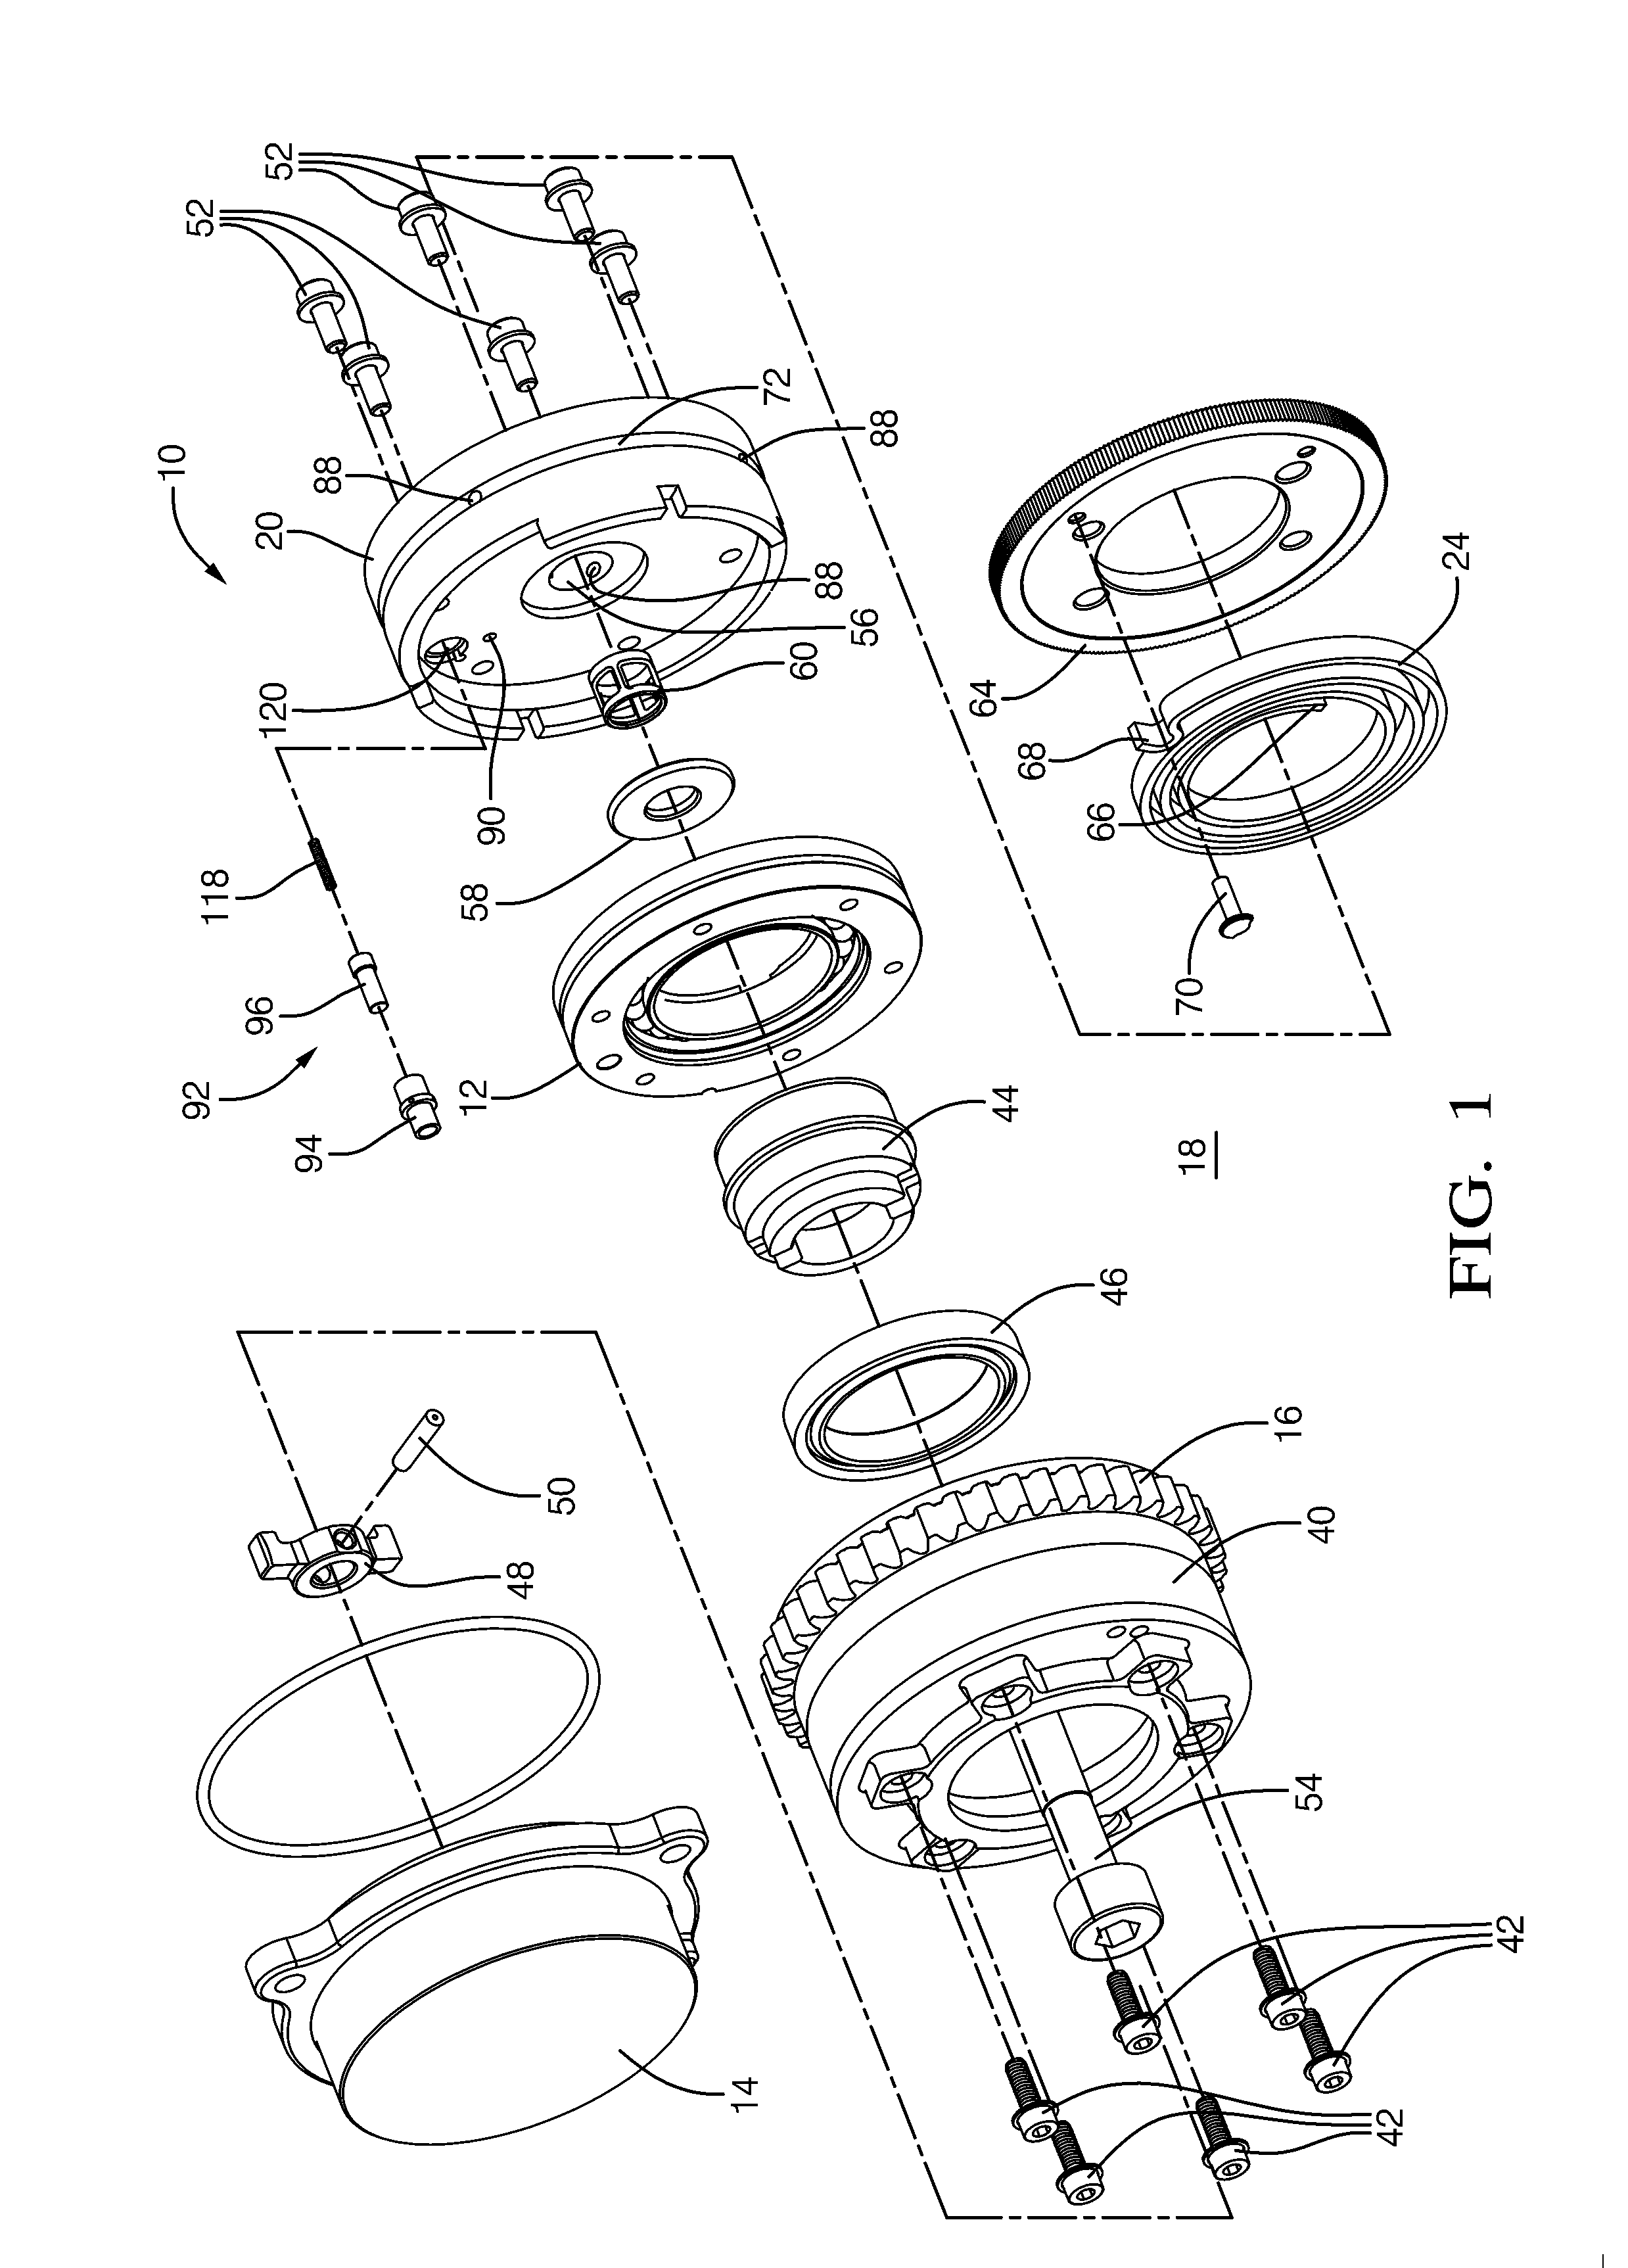 Harmonic Drive Camshaft Phaser with Lock Pin for Selectivley Preventing a Change in Phase Relationship